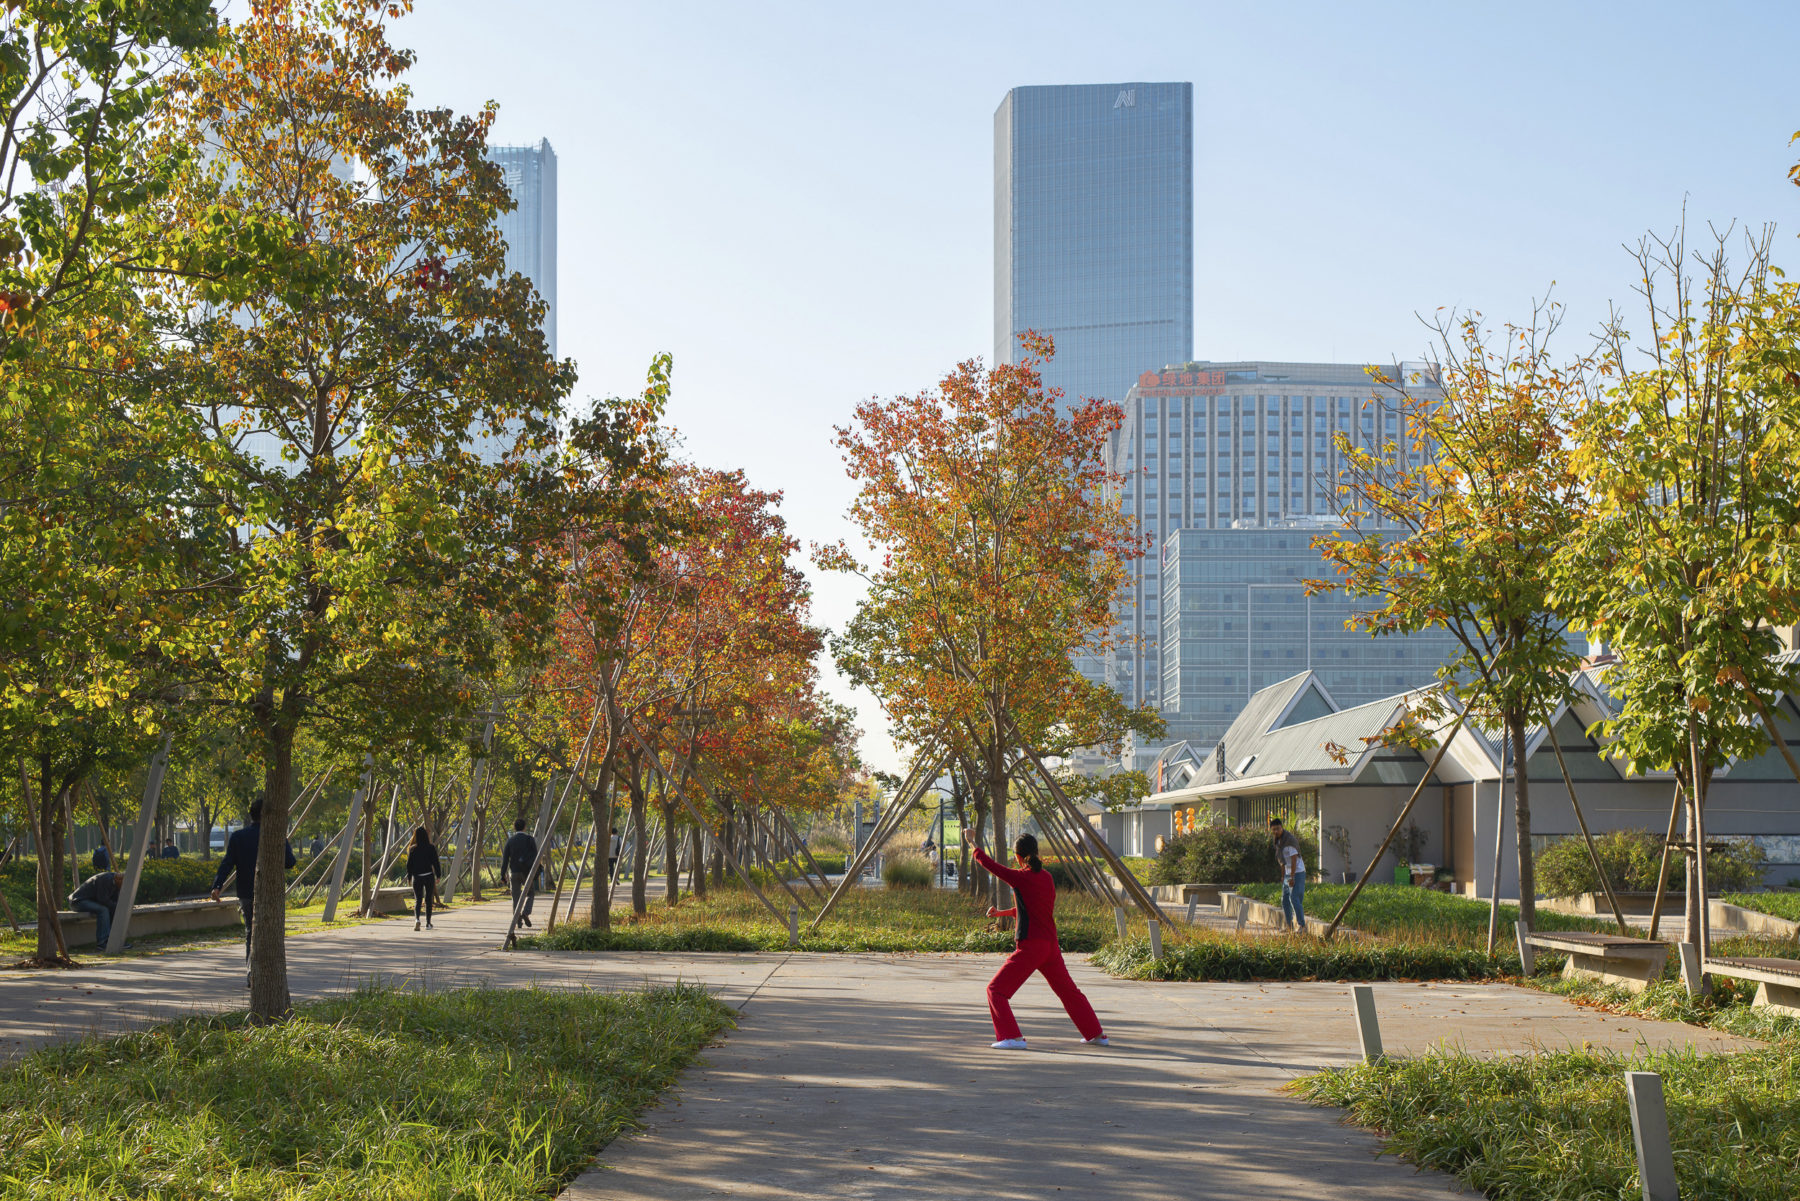 Person wearing red tracksuit doing tai chi in lush park with city visible in the background. Other people walk along paths nearby